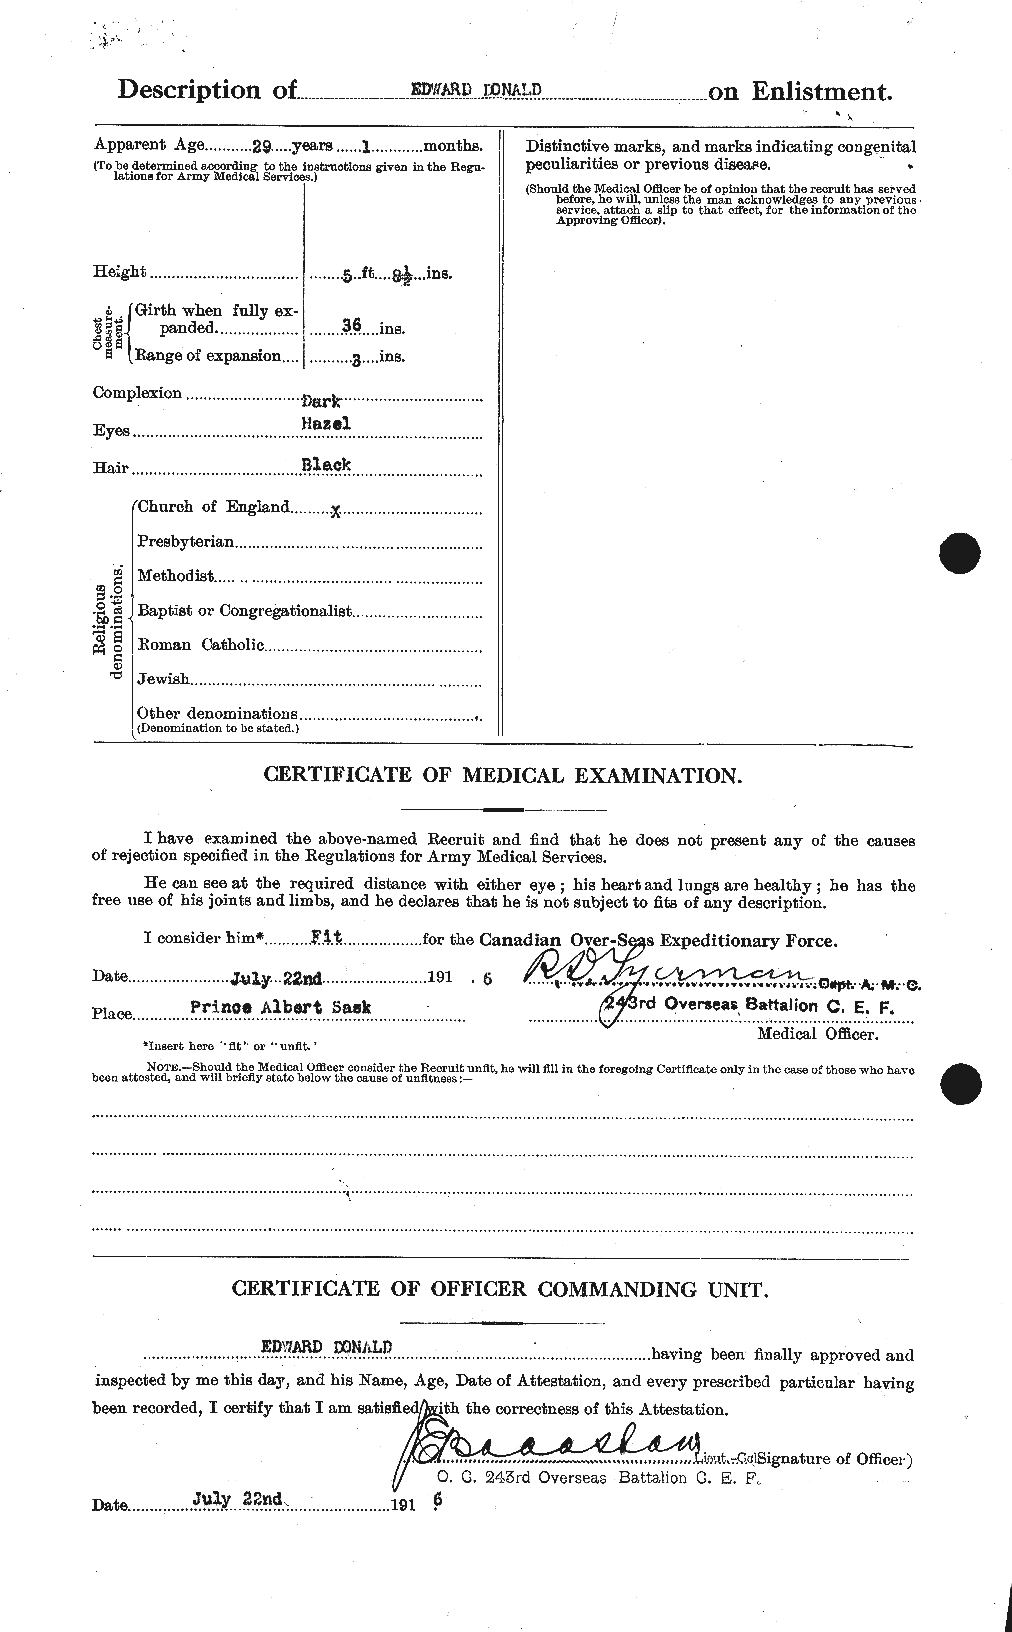 Personnel Records of the First World War - CEF 295726b